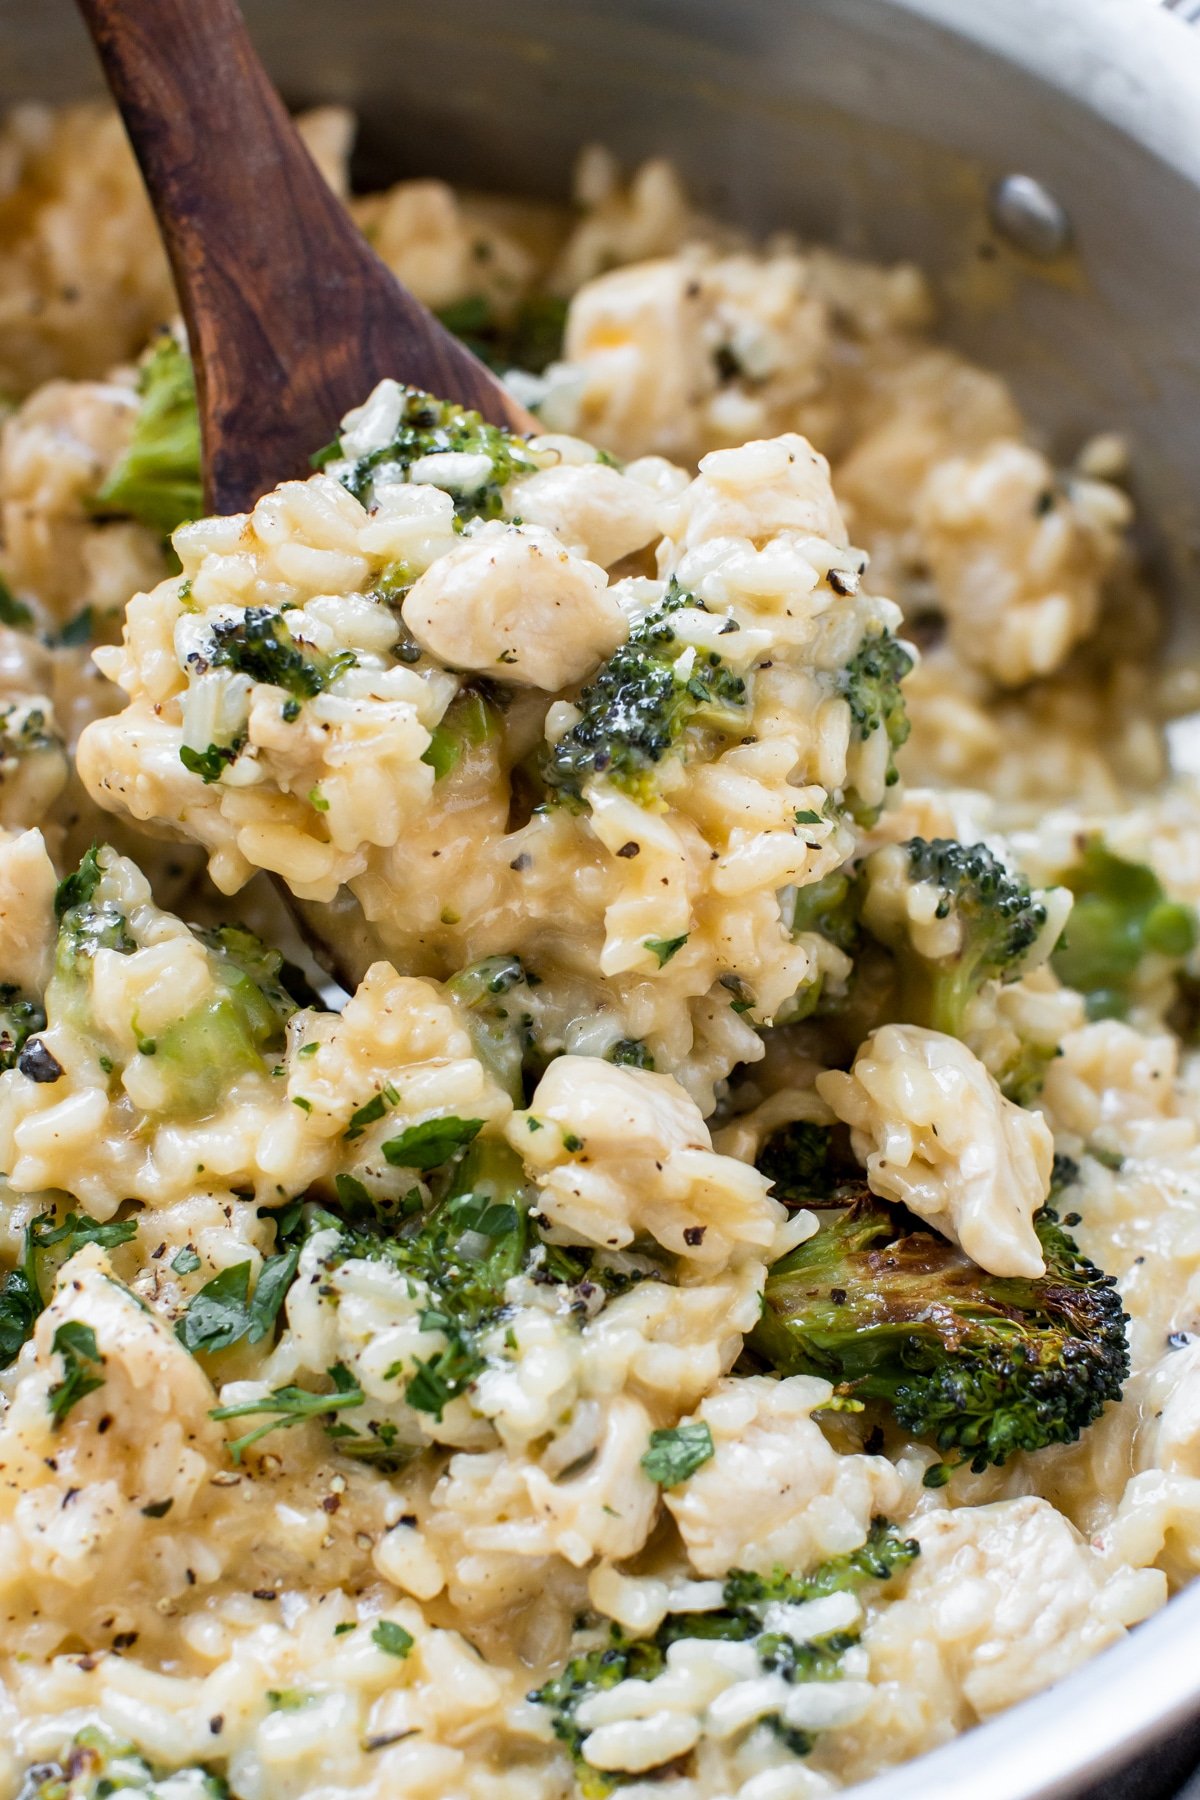 Best Risotto Recipe - How To Make Classic Risotto